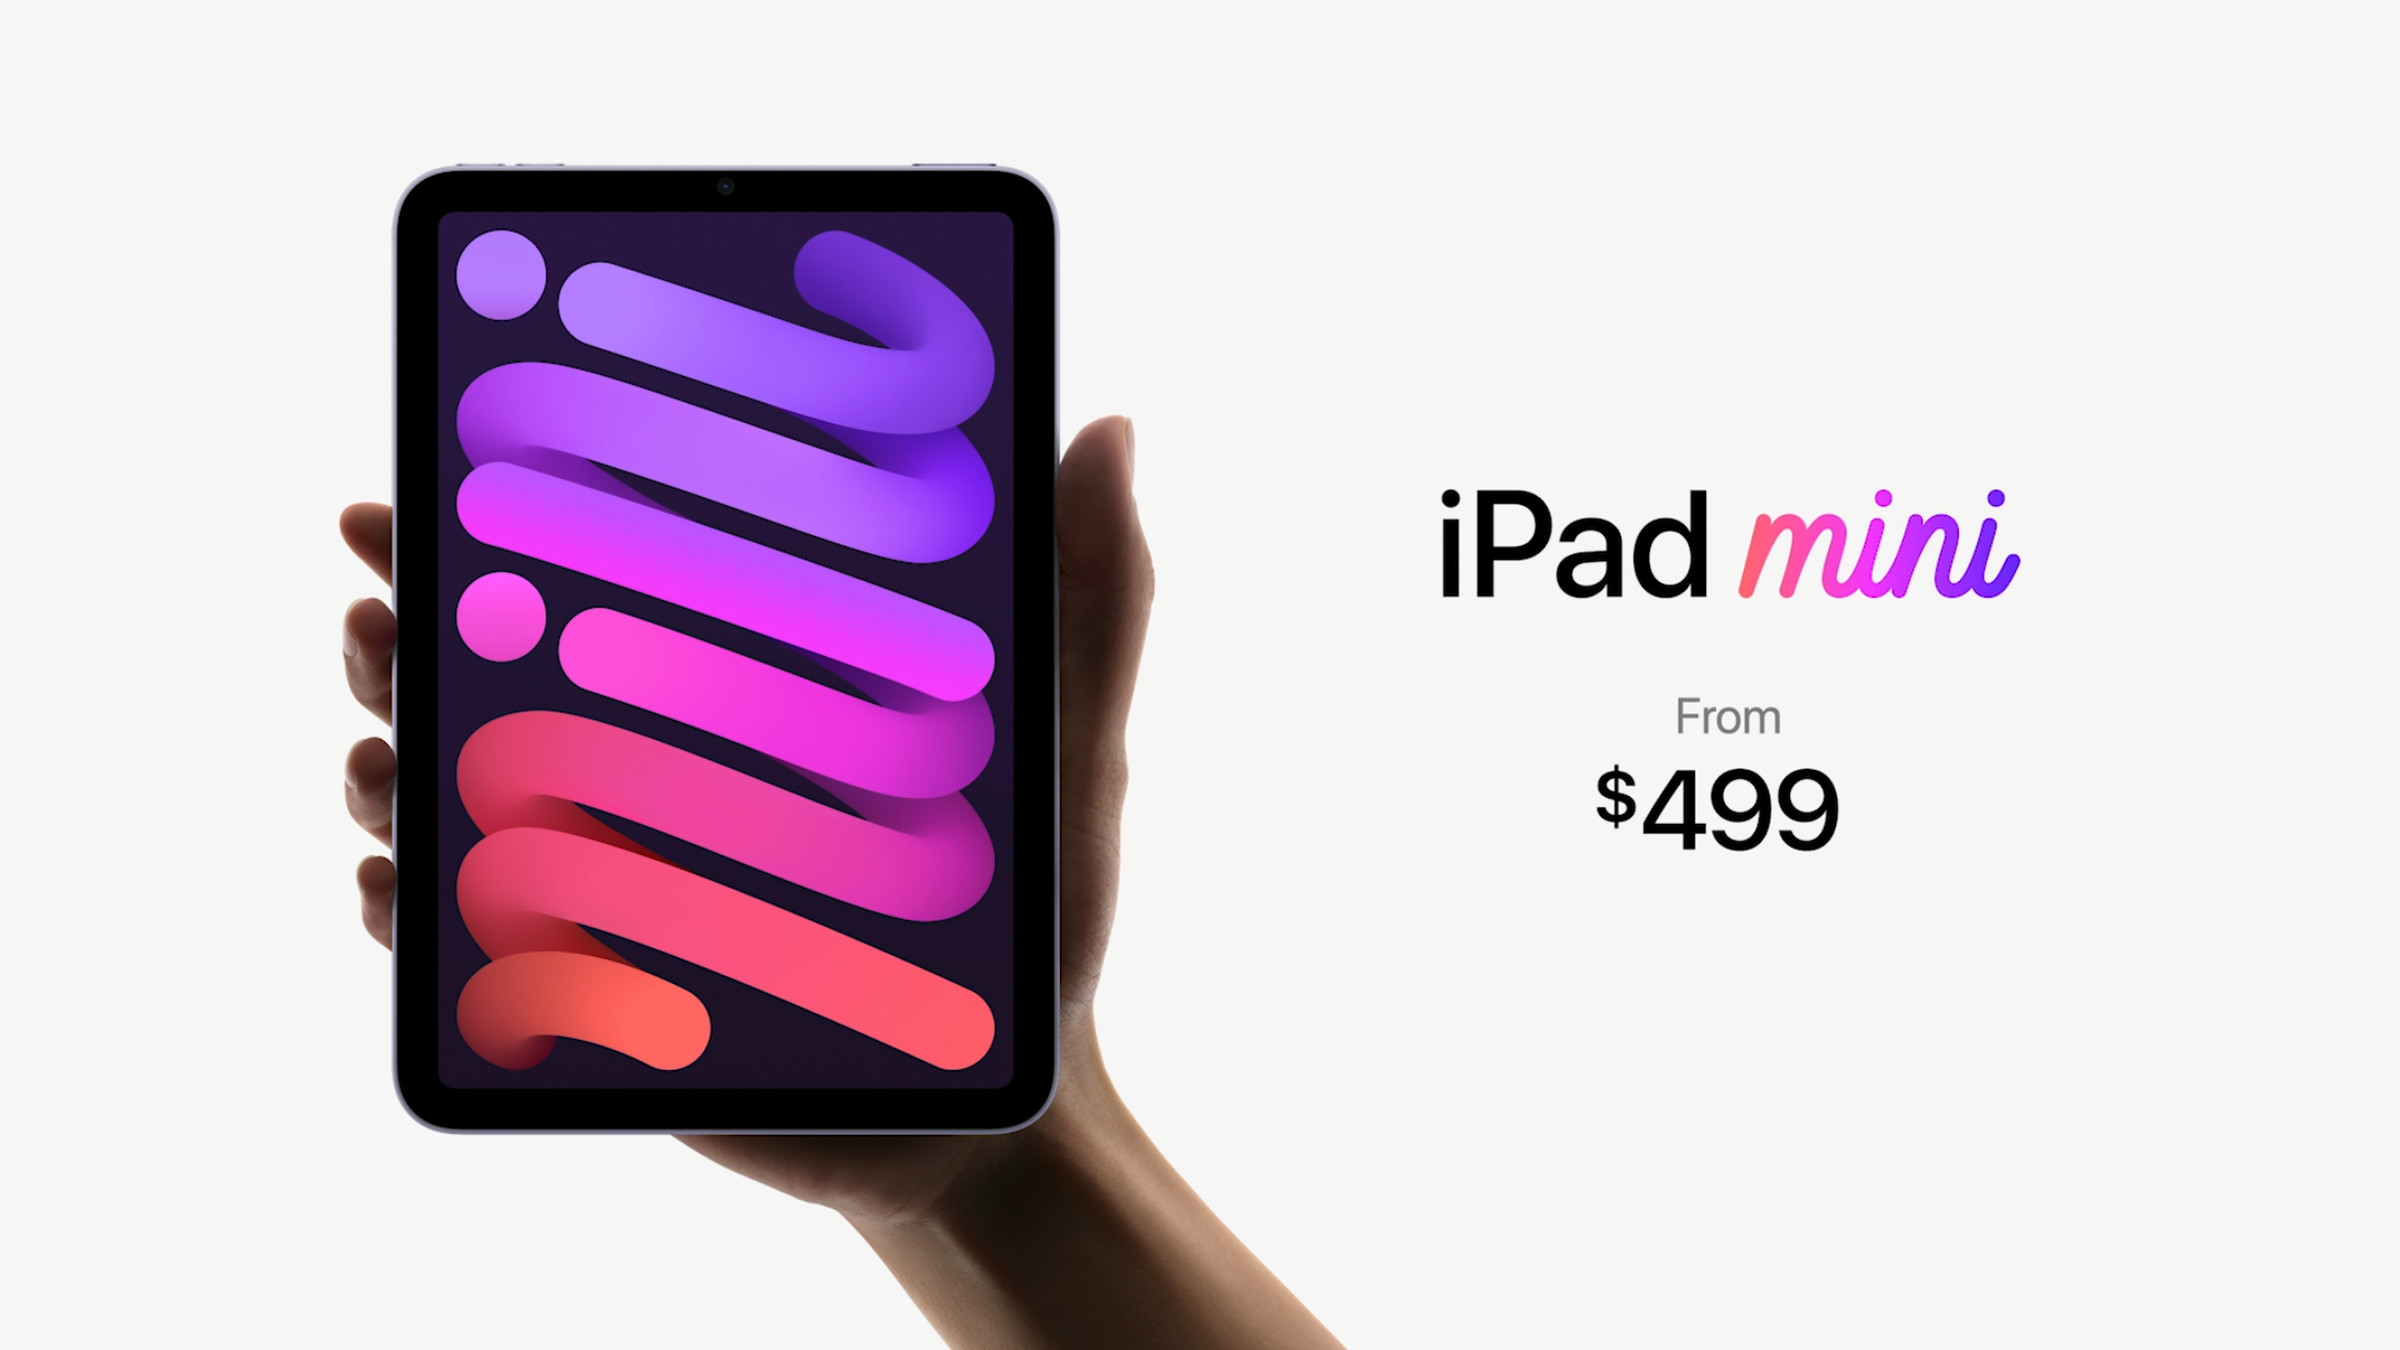 The new iPad Mini for 2021 packs more screen and modern design in a diminutive size.